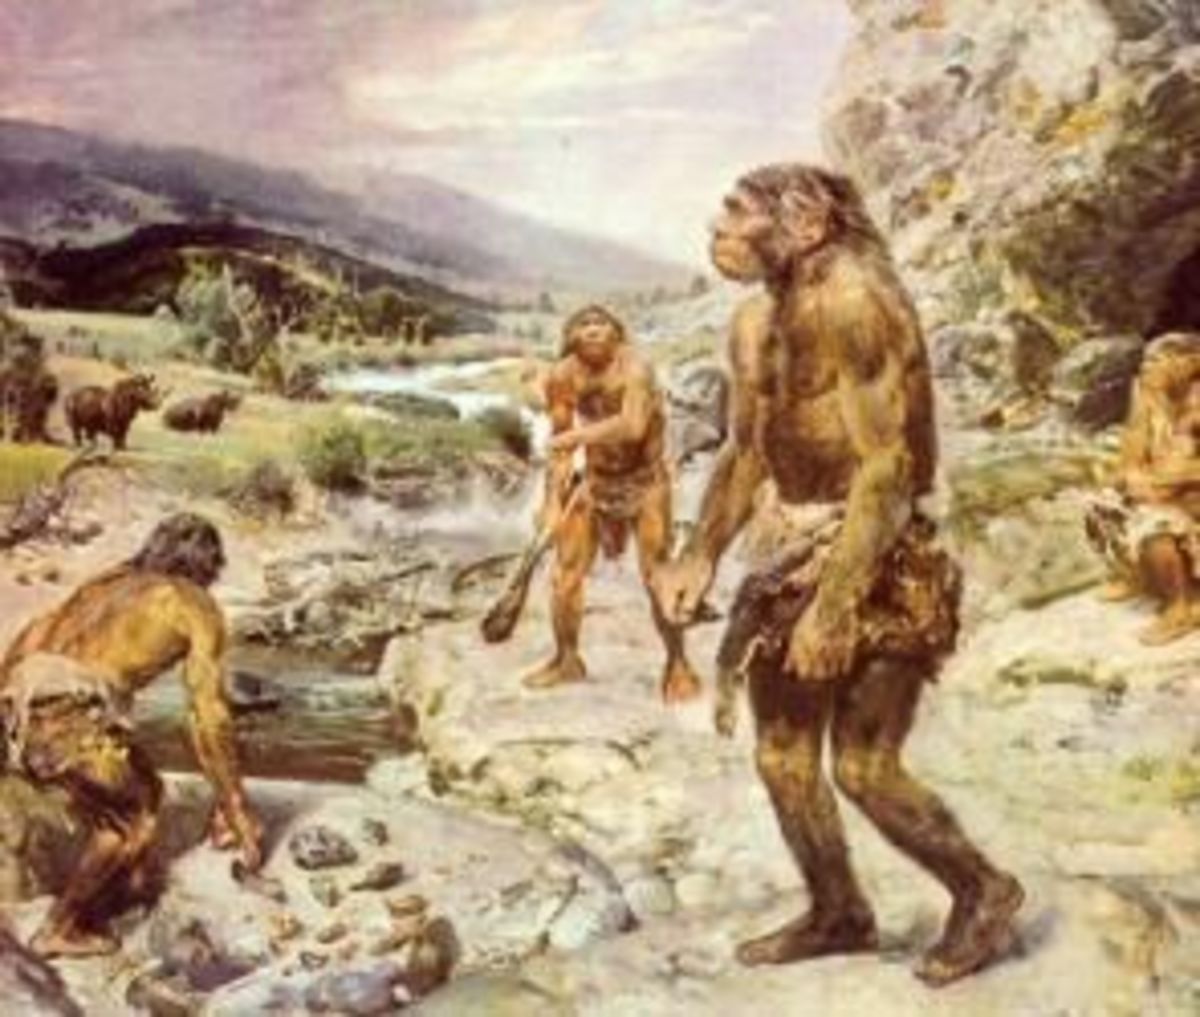 Neanderthals: Our oldest Relatives